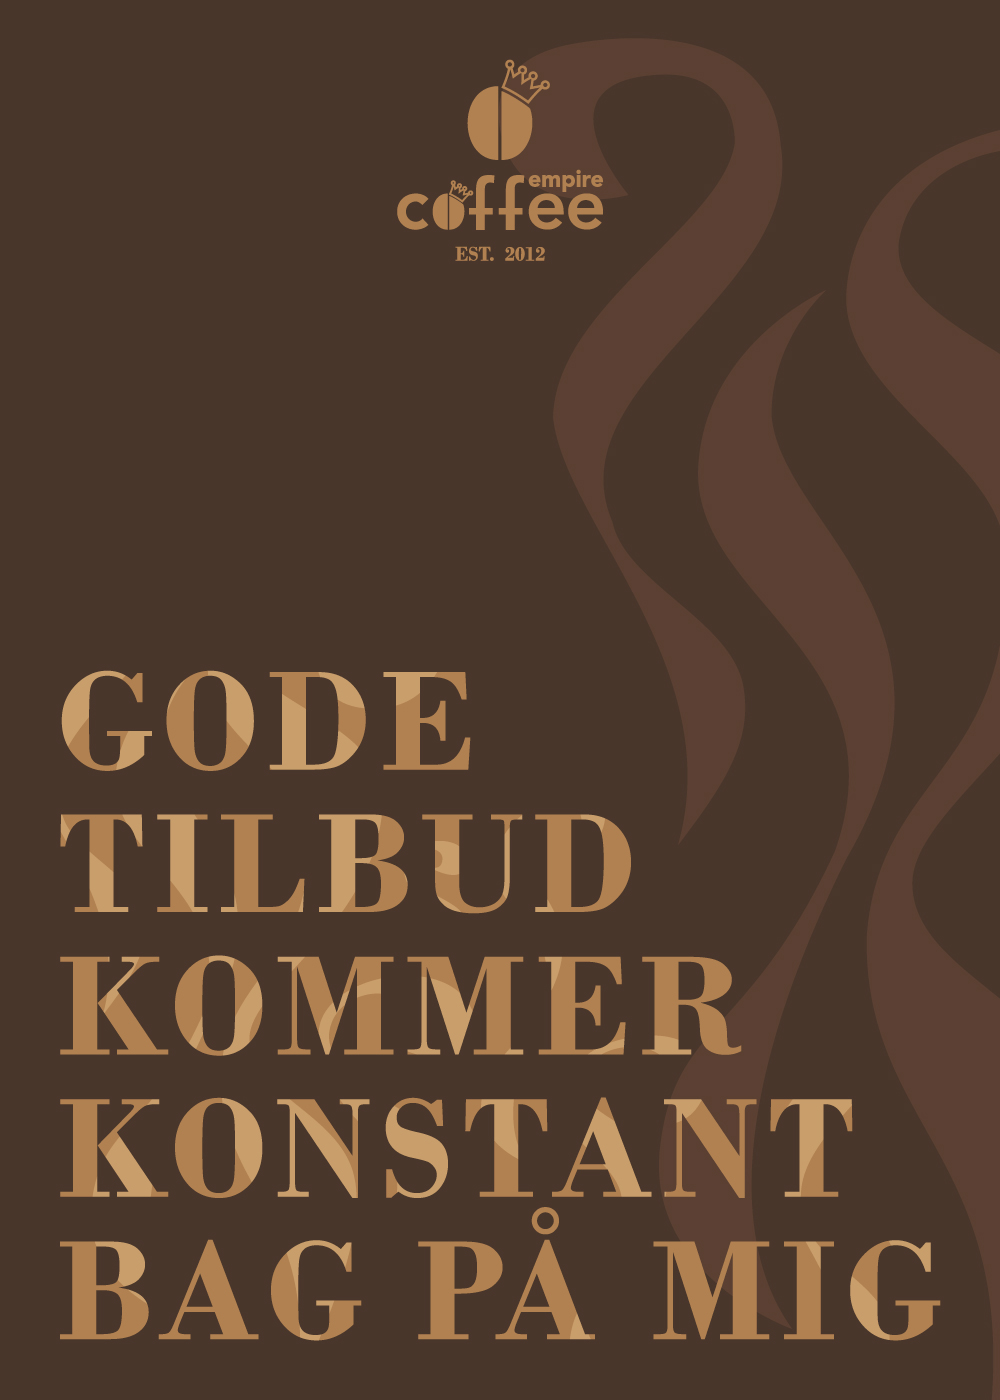 coffee empire posters